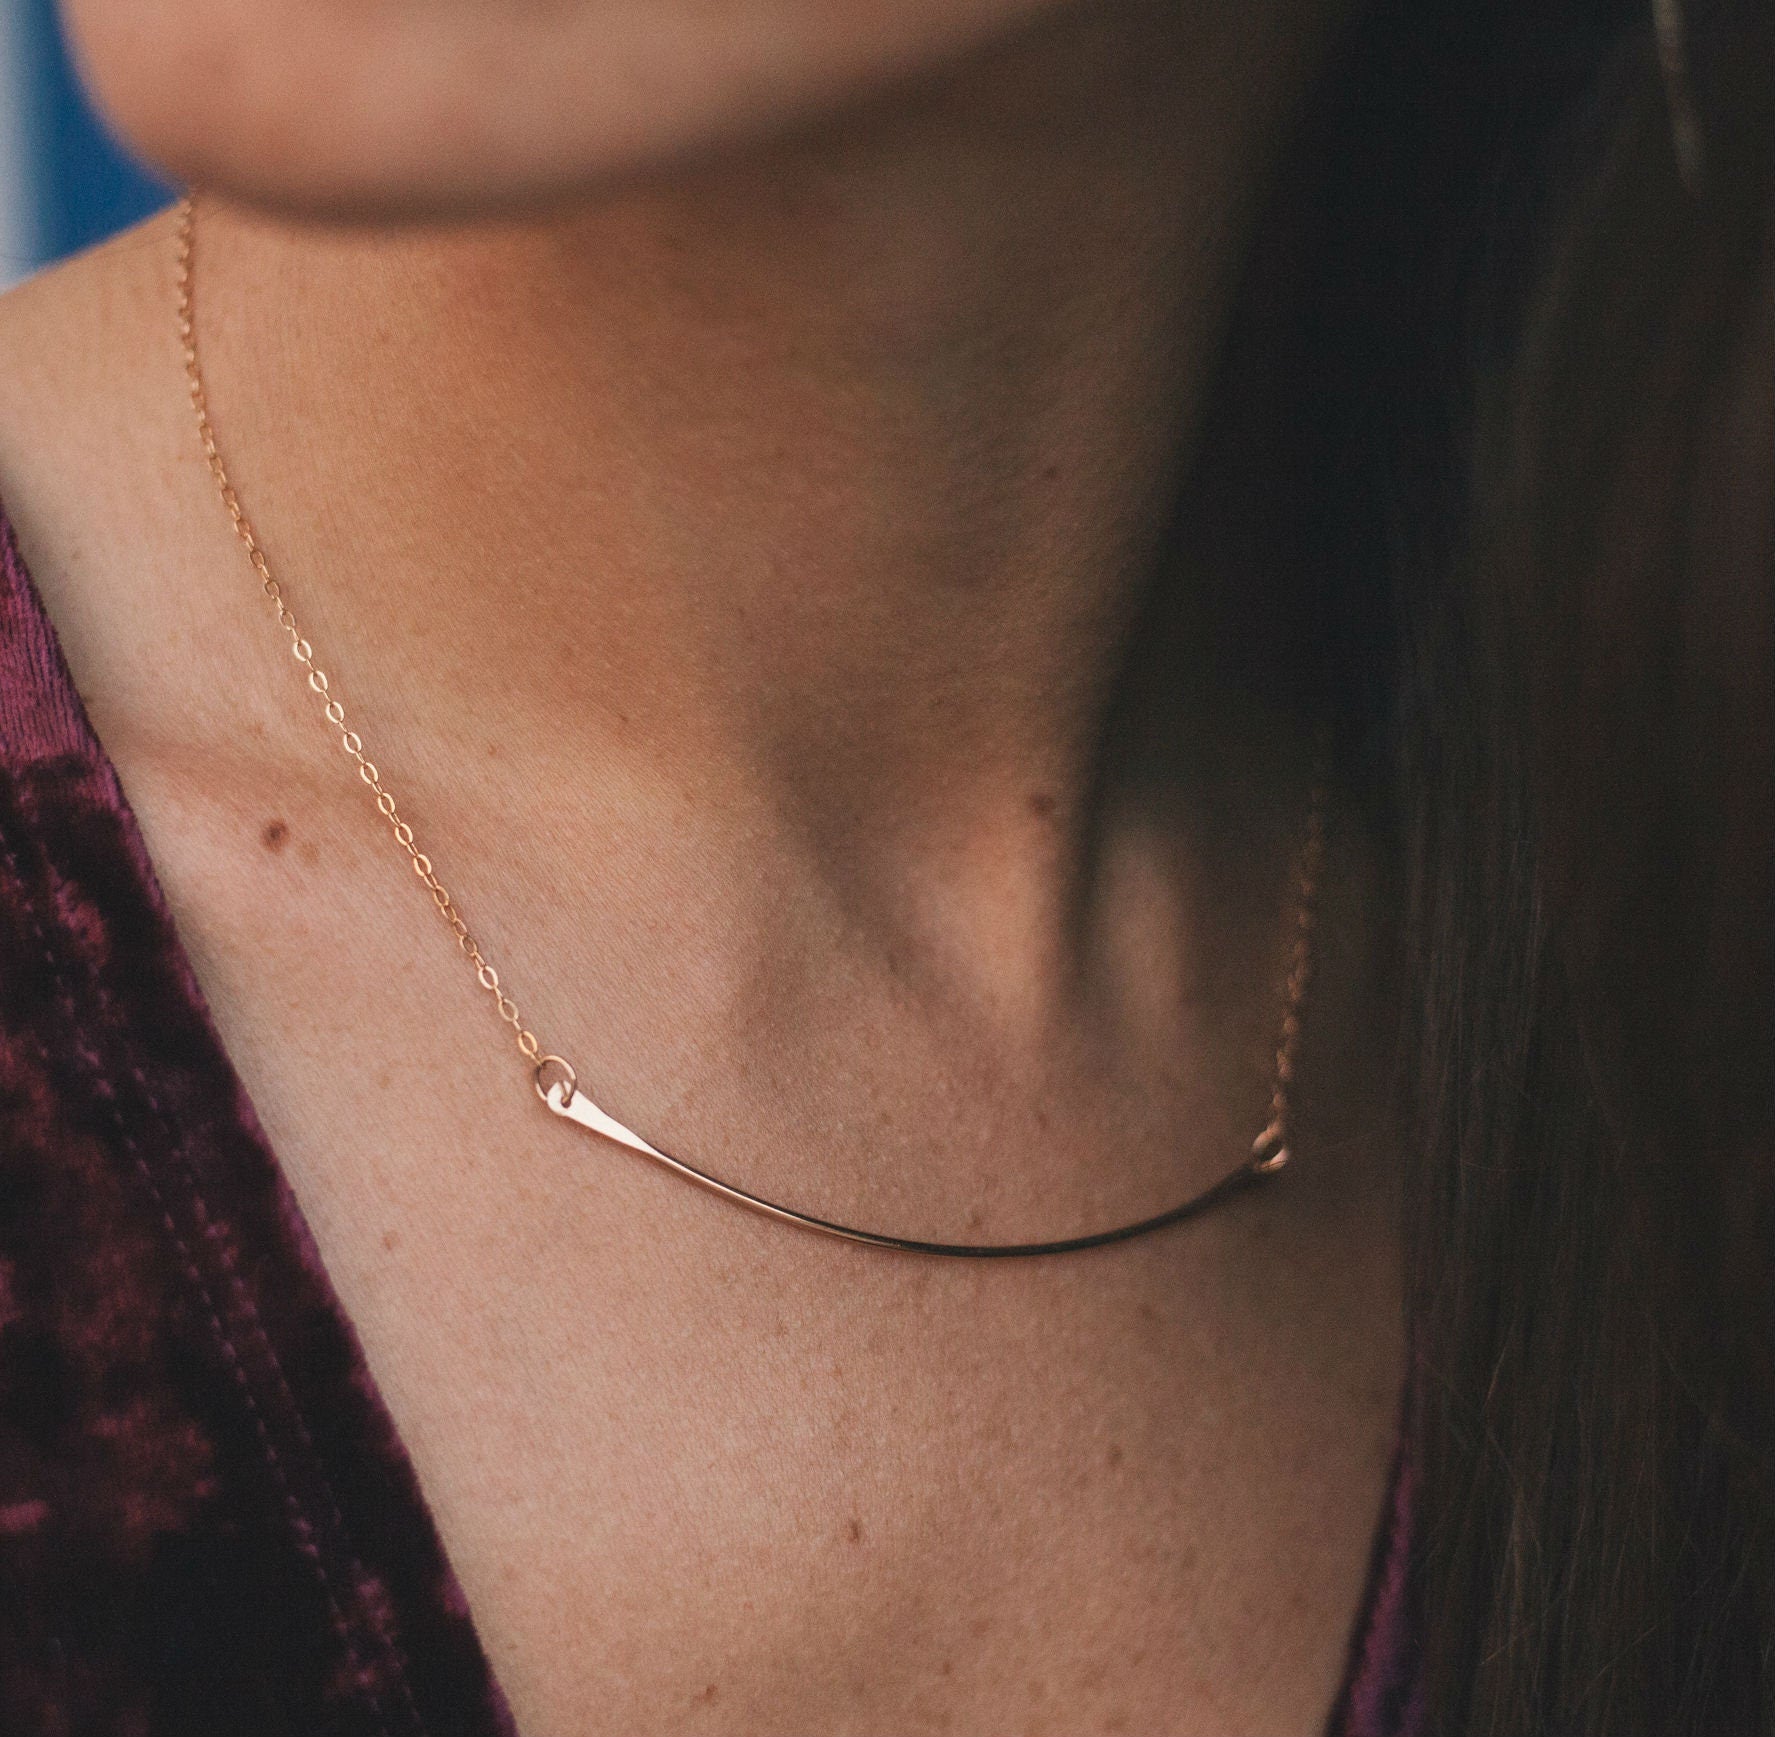 Curved Bar Necklace - Gold Bar Necklace - Layered Necklace - Minimalist Necklace - Dainty Necklace - Delicate Necklace - Choker Necklace - Fire + Mineral Jewelry